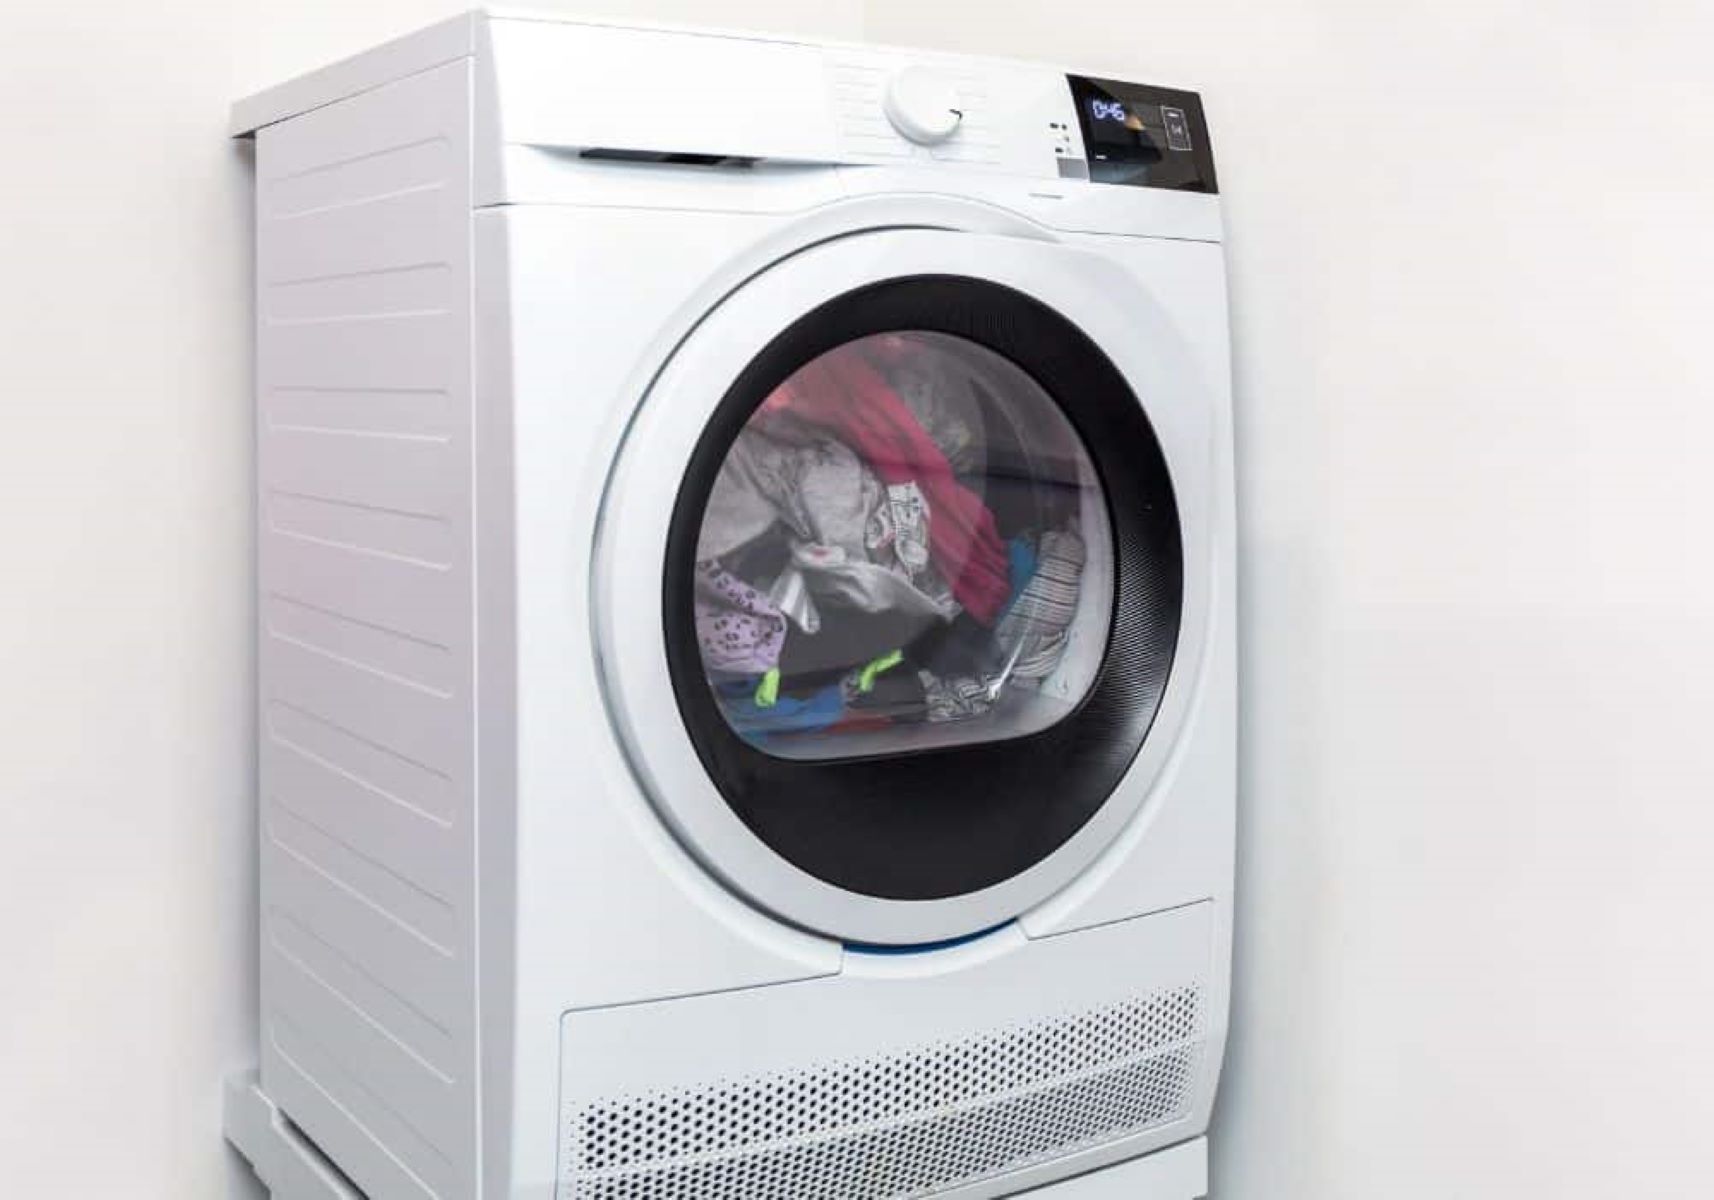 How To Fix The Error Code F26 For Whirlpool Dryer